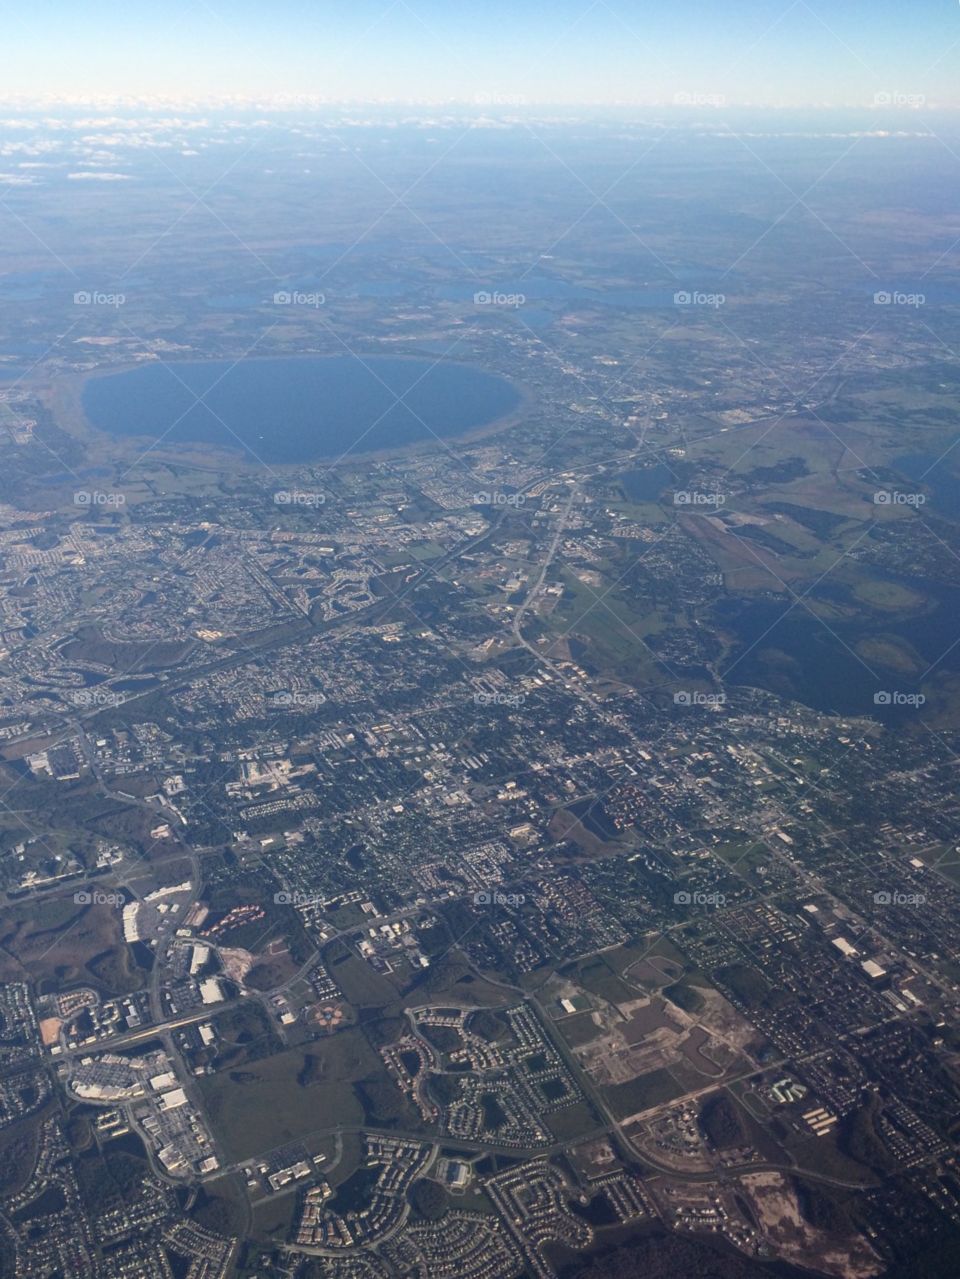 Orlando from above